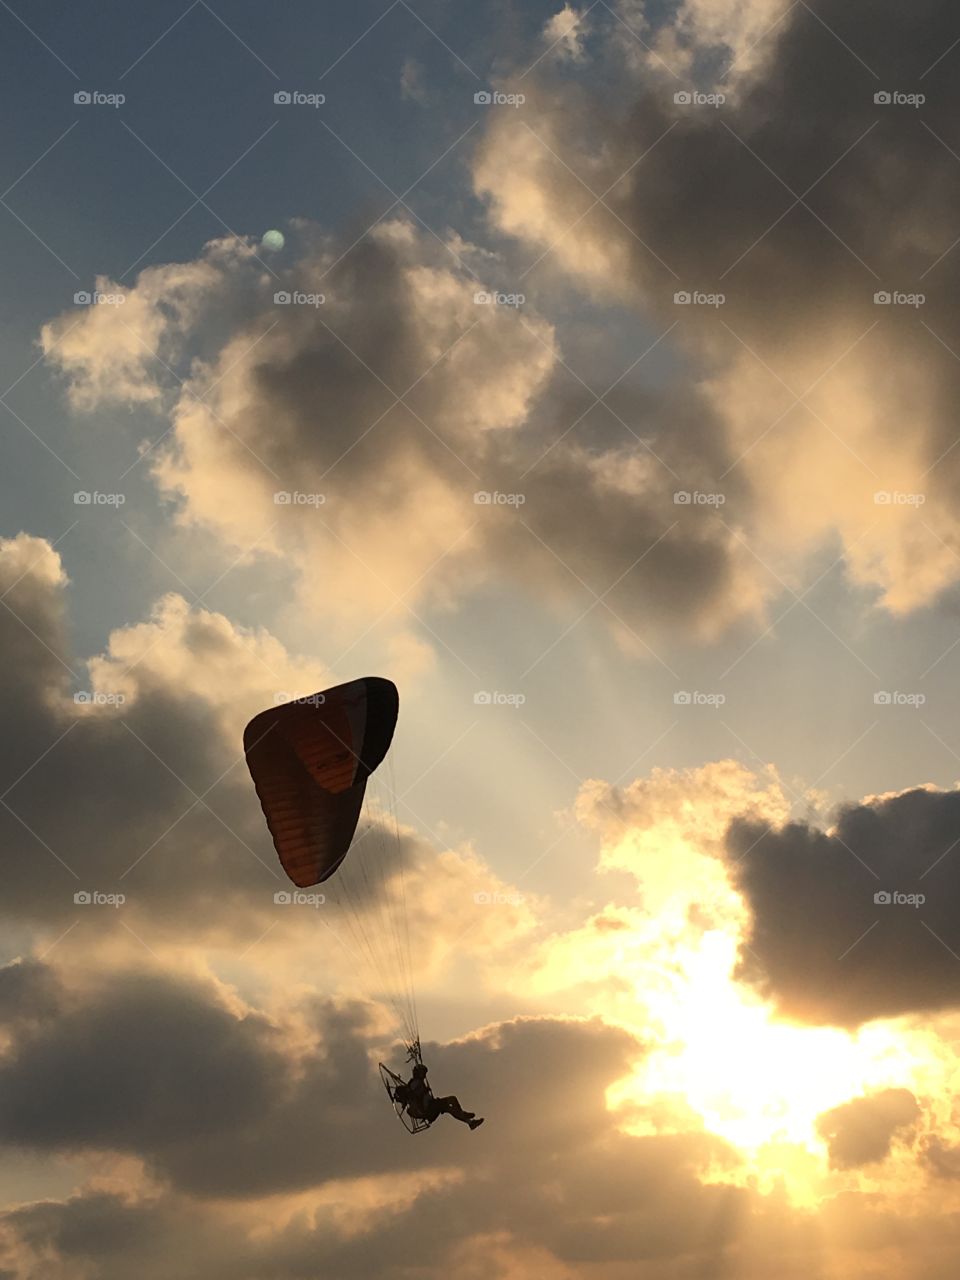 Paraglider floating through the sunset